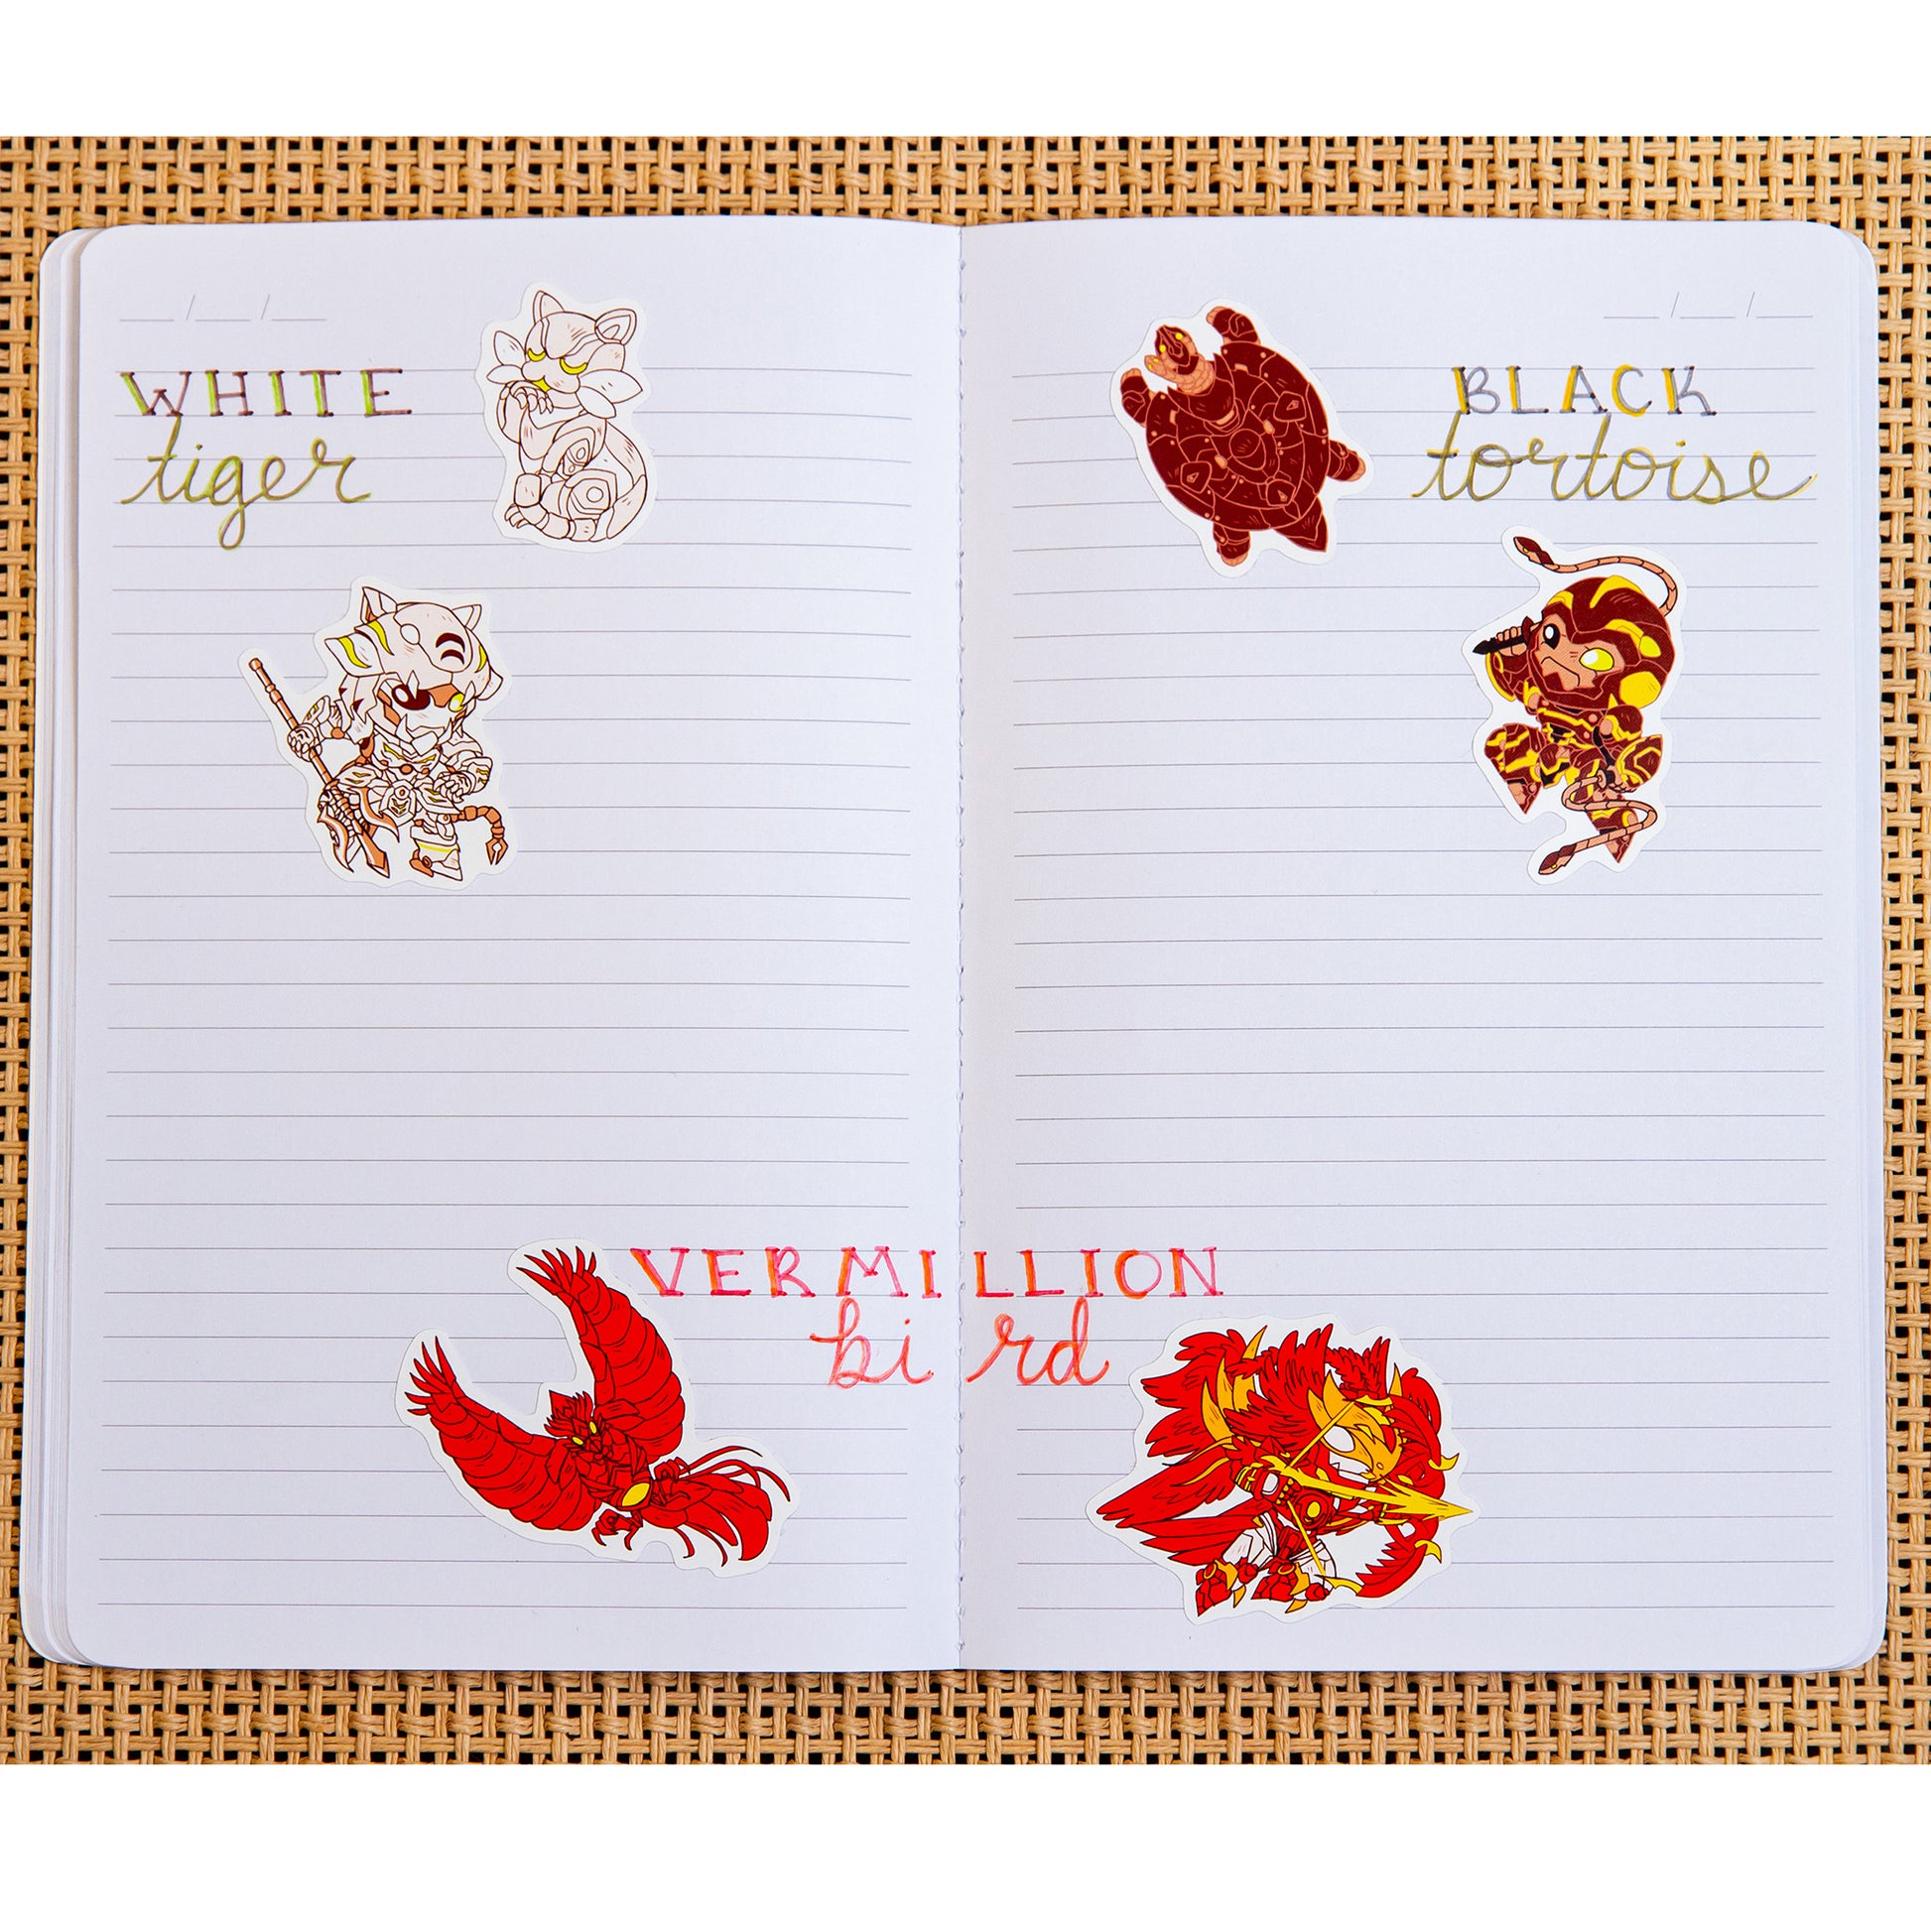 All six stickers from the Iron Widow: Mecha Sticker Set used in a lined undated planner with their names written in cursive. Names read: "White Tiger, Black Tortoise, and Vermillion Bird."